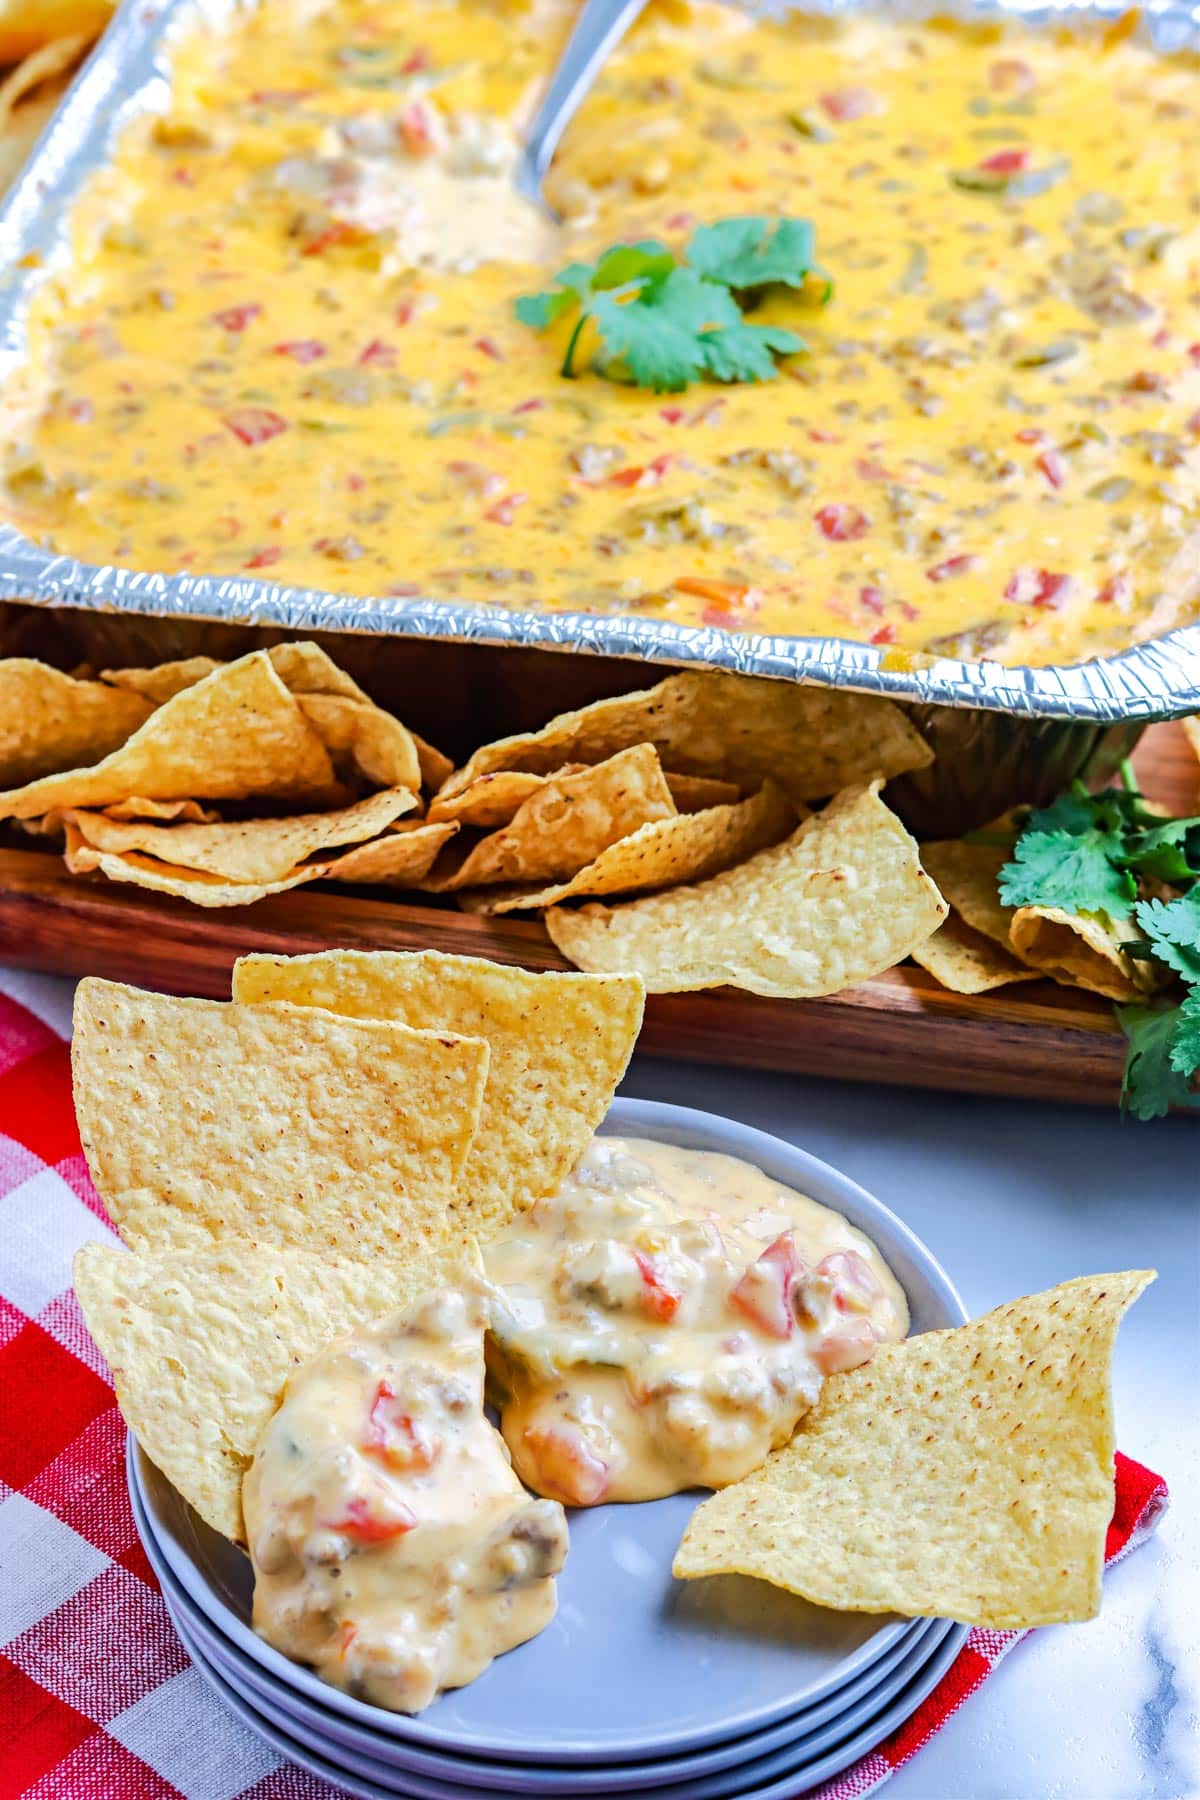 The finished Smoked Queso Recipe scooped out on a plate with chips.